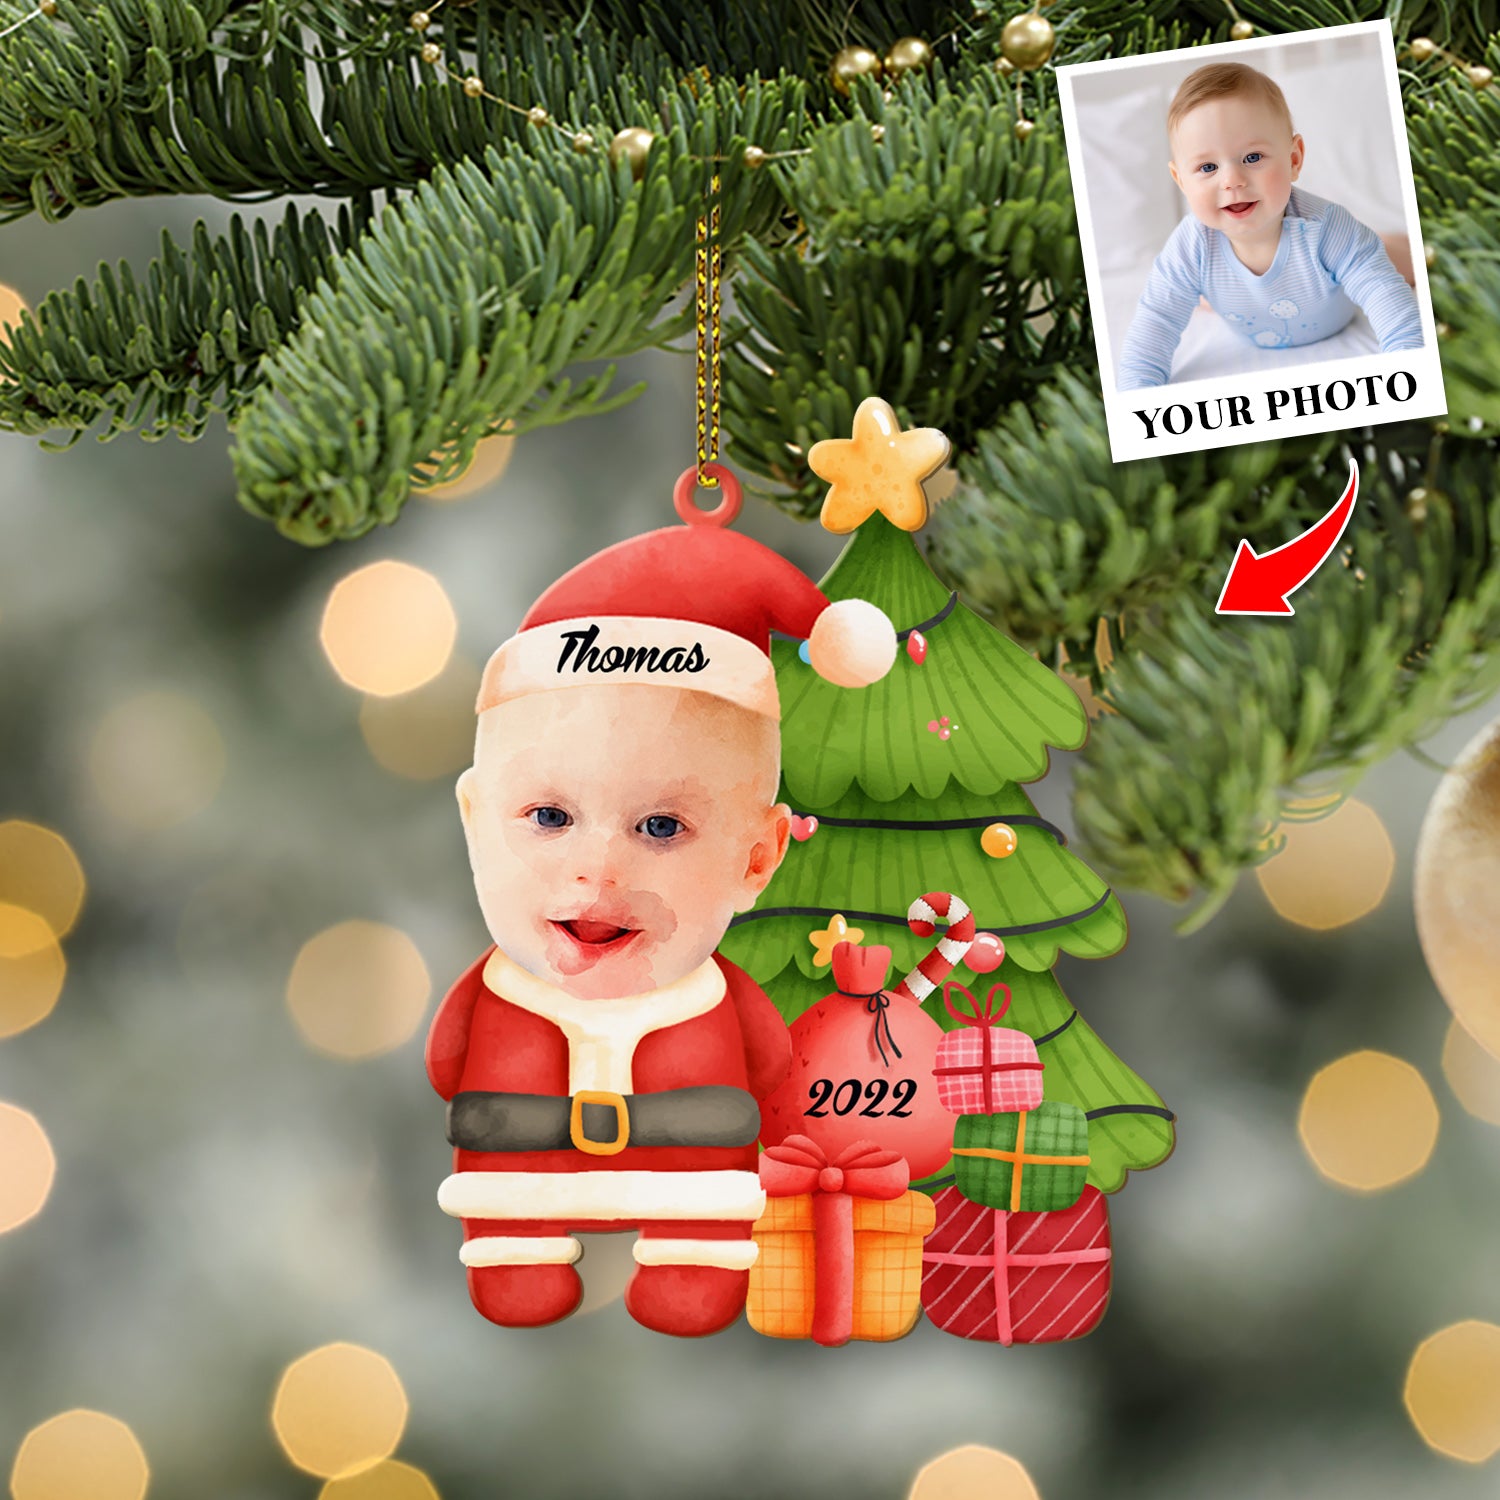 Face From Photo, Ornament For Baby, Christmas Santa Claus, Christmas Shape Ornament 2 Sides